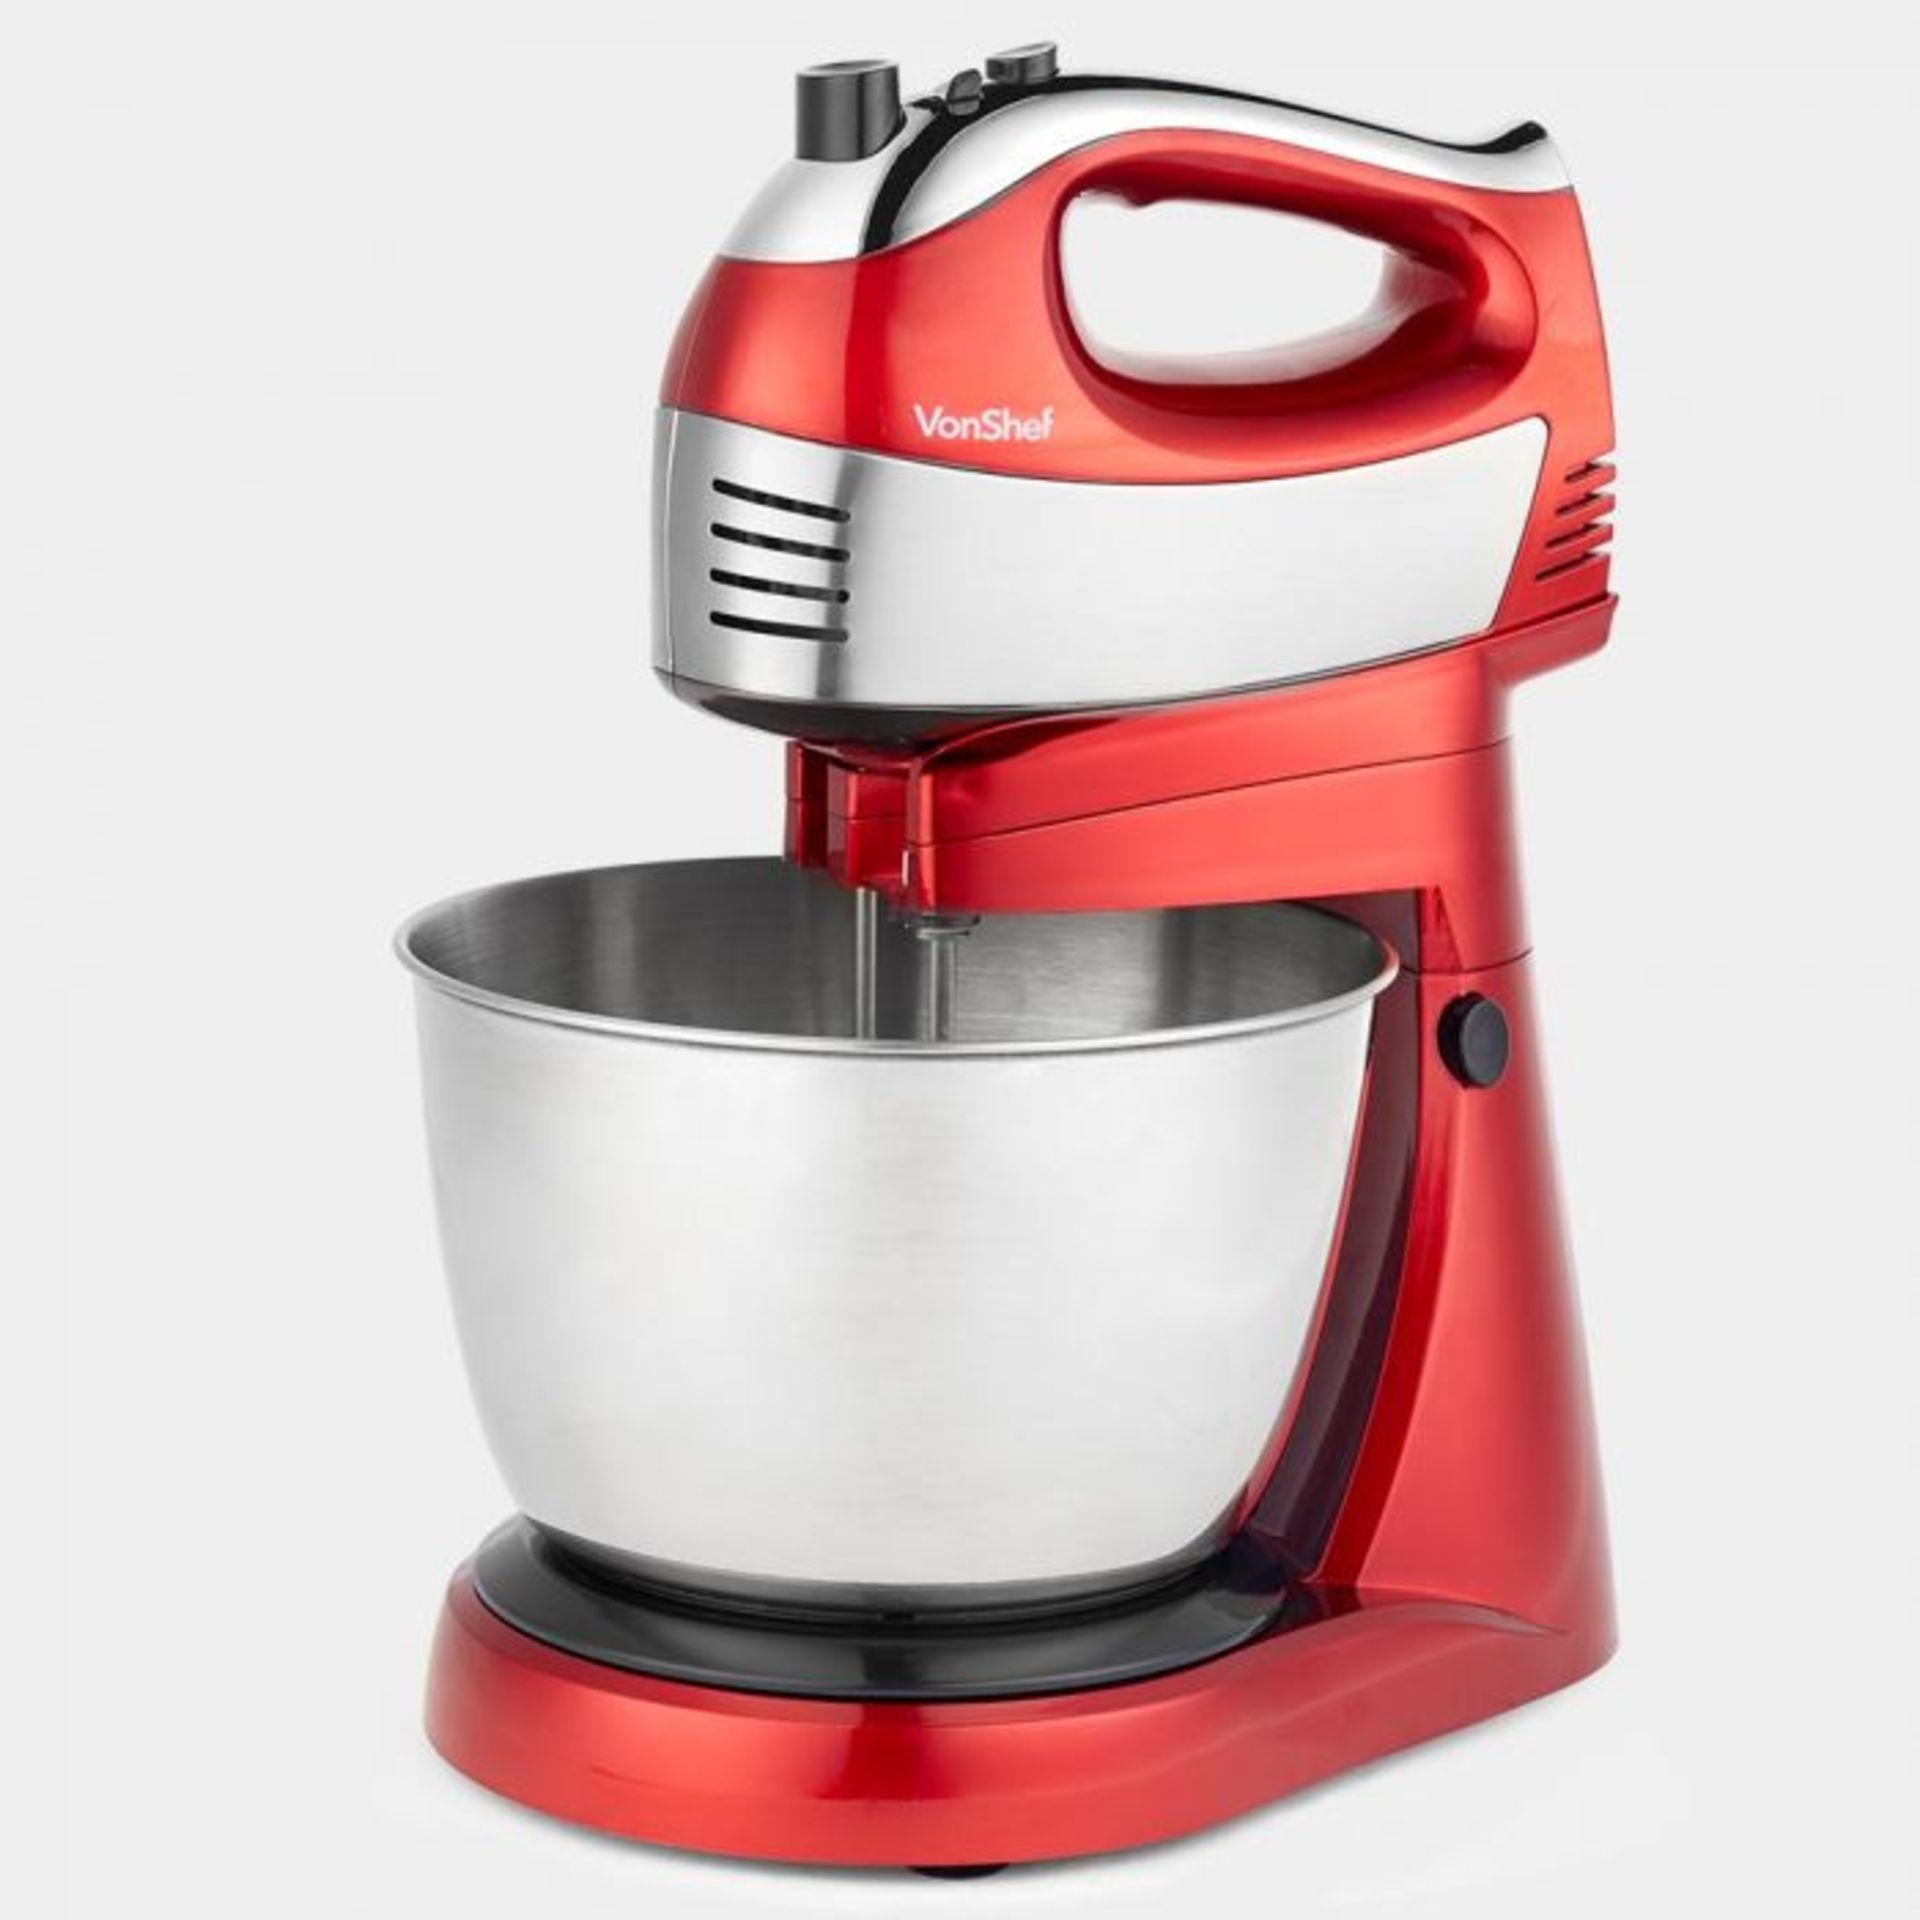 (V38) 400W 2 in 1 Hand & Stand Mixer This 2 in 1 appliance instantly converts from a stable st...